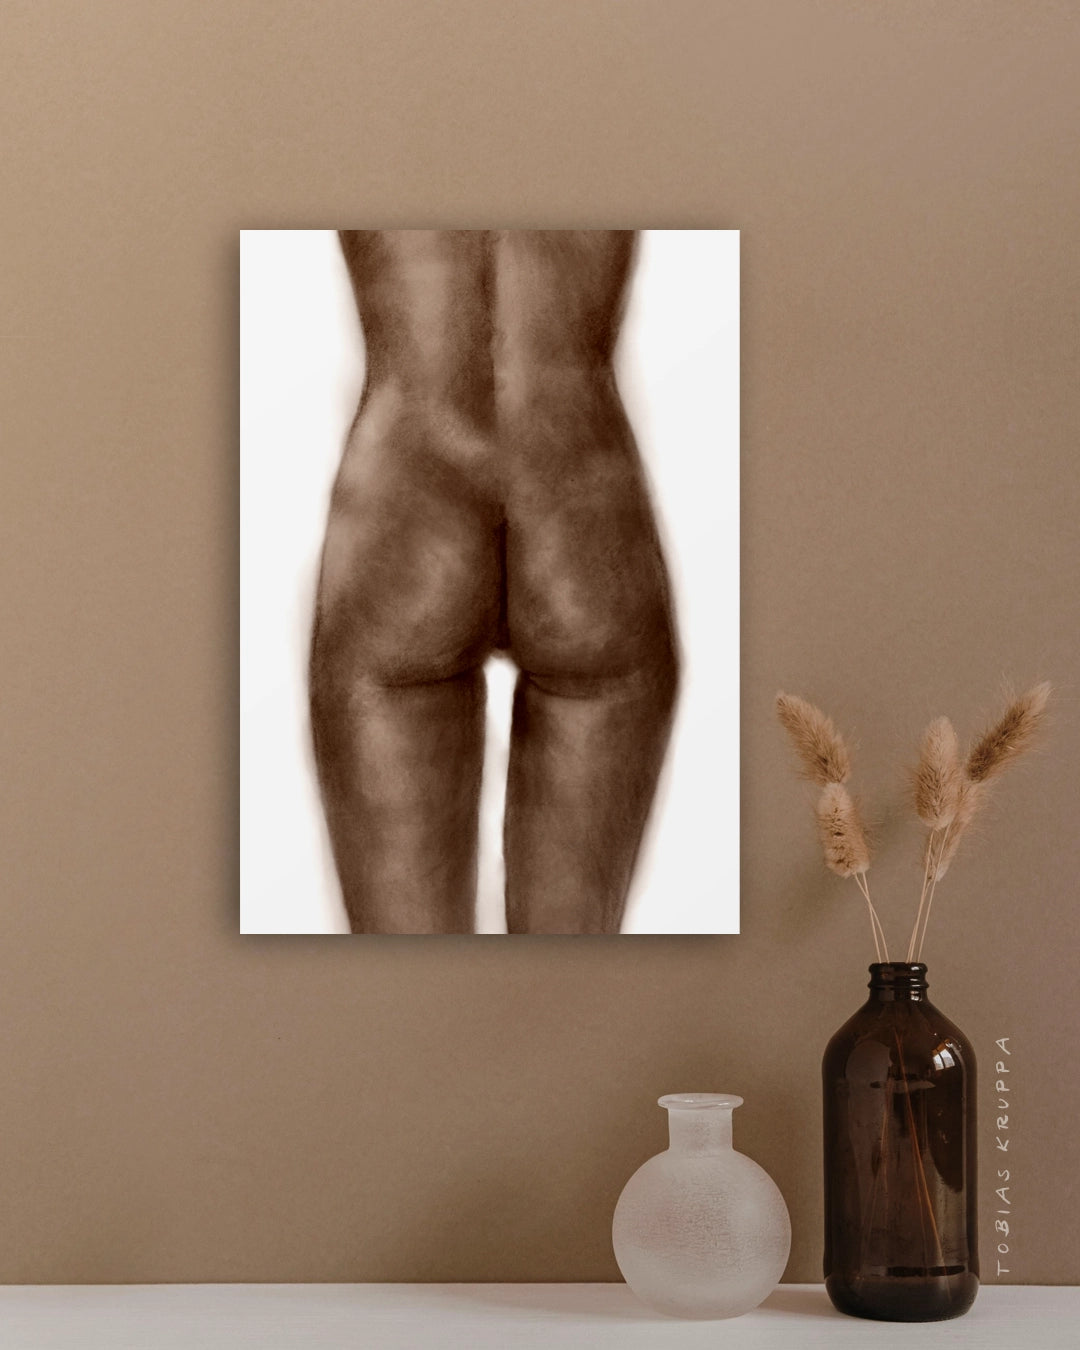 Unique and personalized fine art prints of commissioned artworks depicting beautiful, natural female bottoms